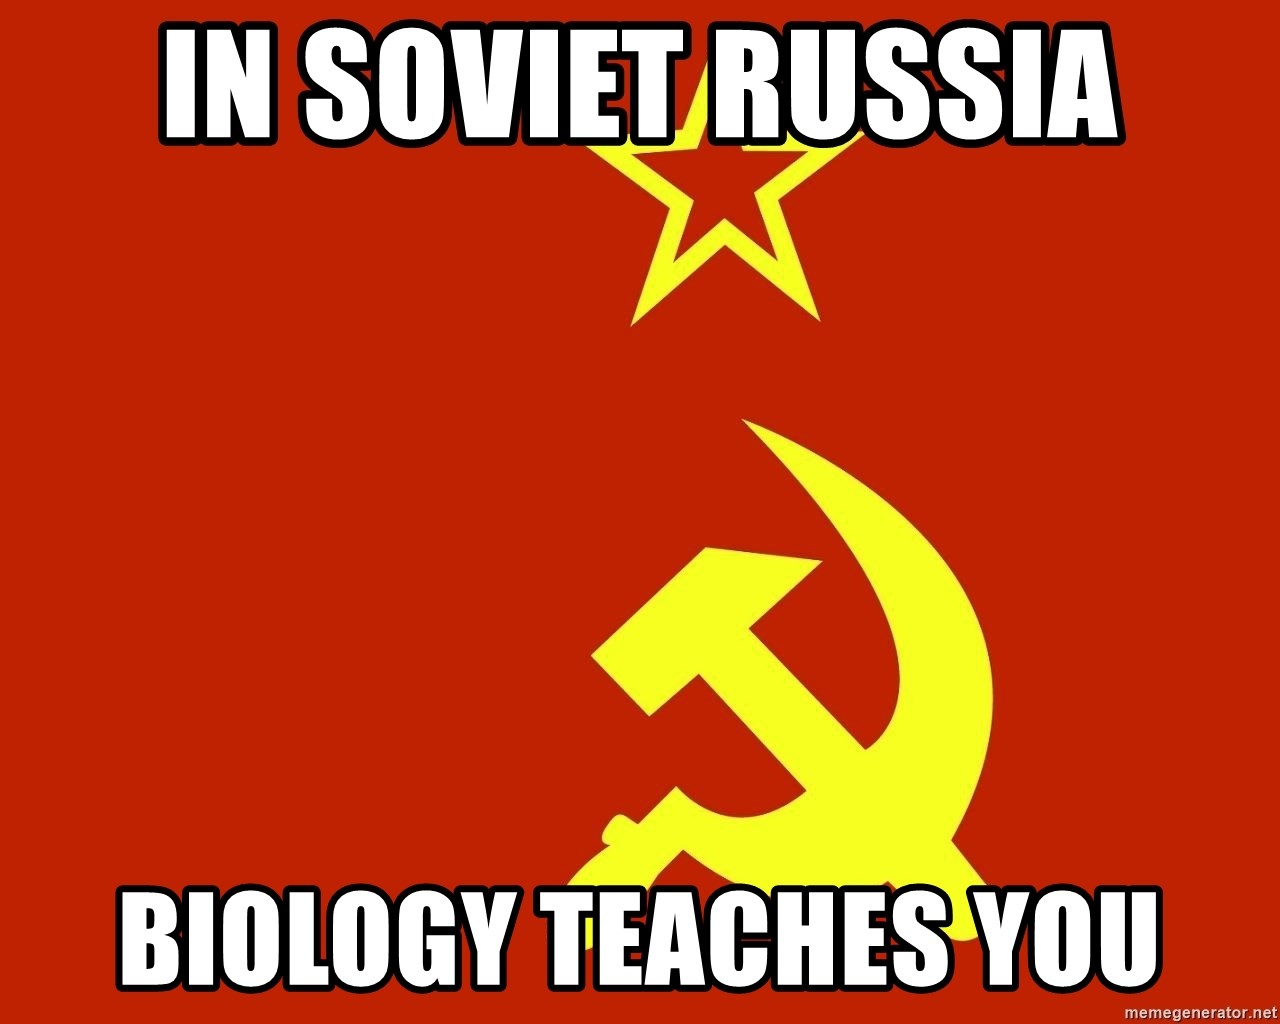 In Soviet Russia - In soviet russia biology teaches you